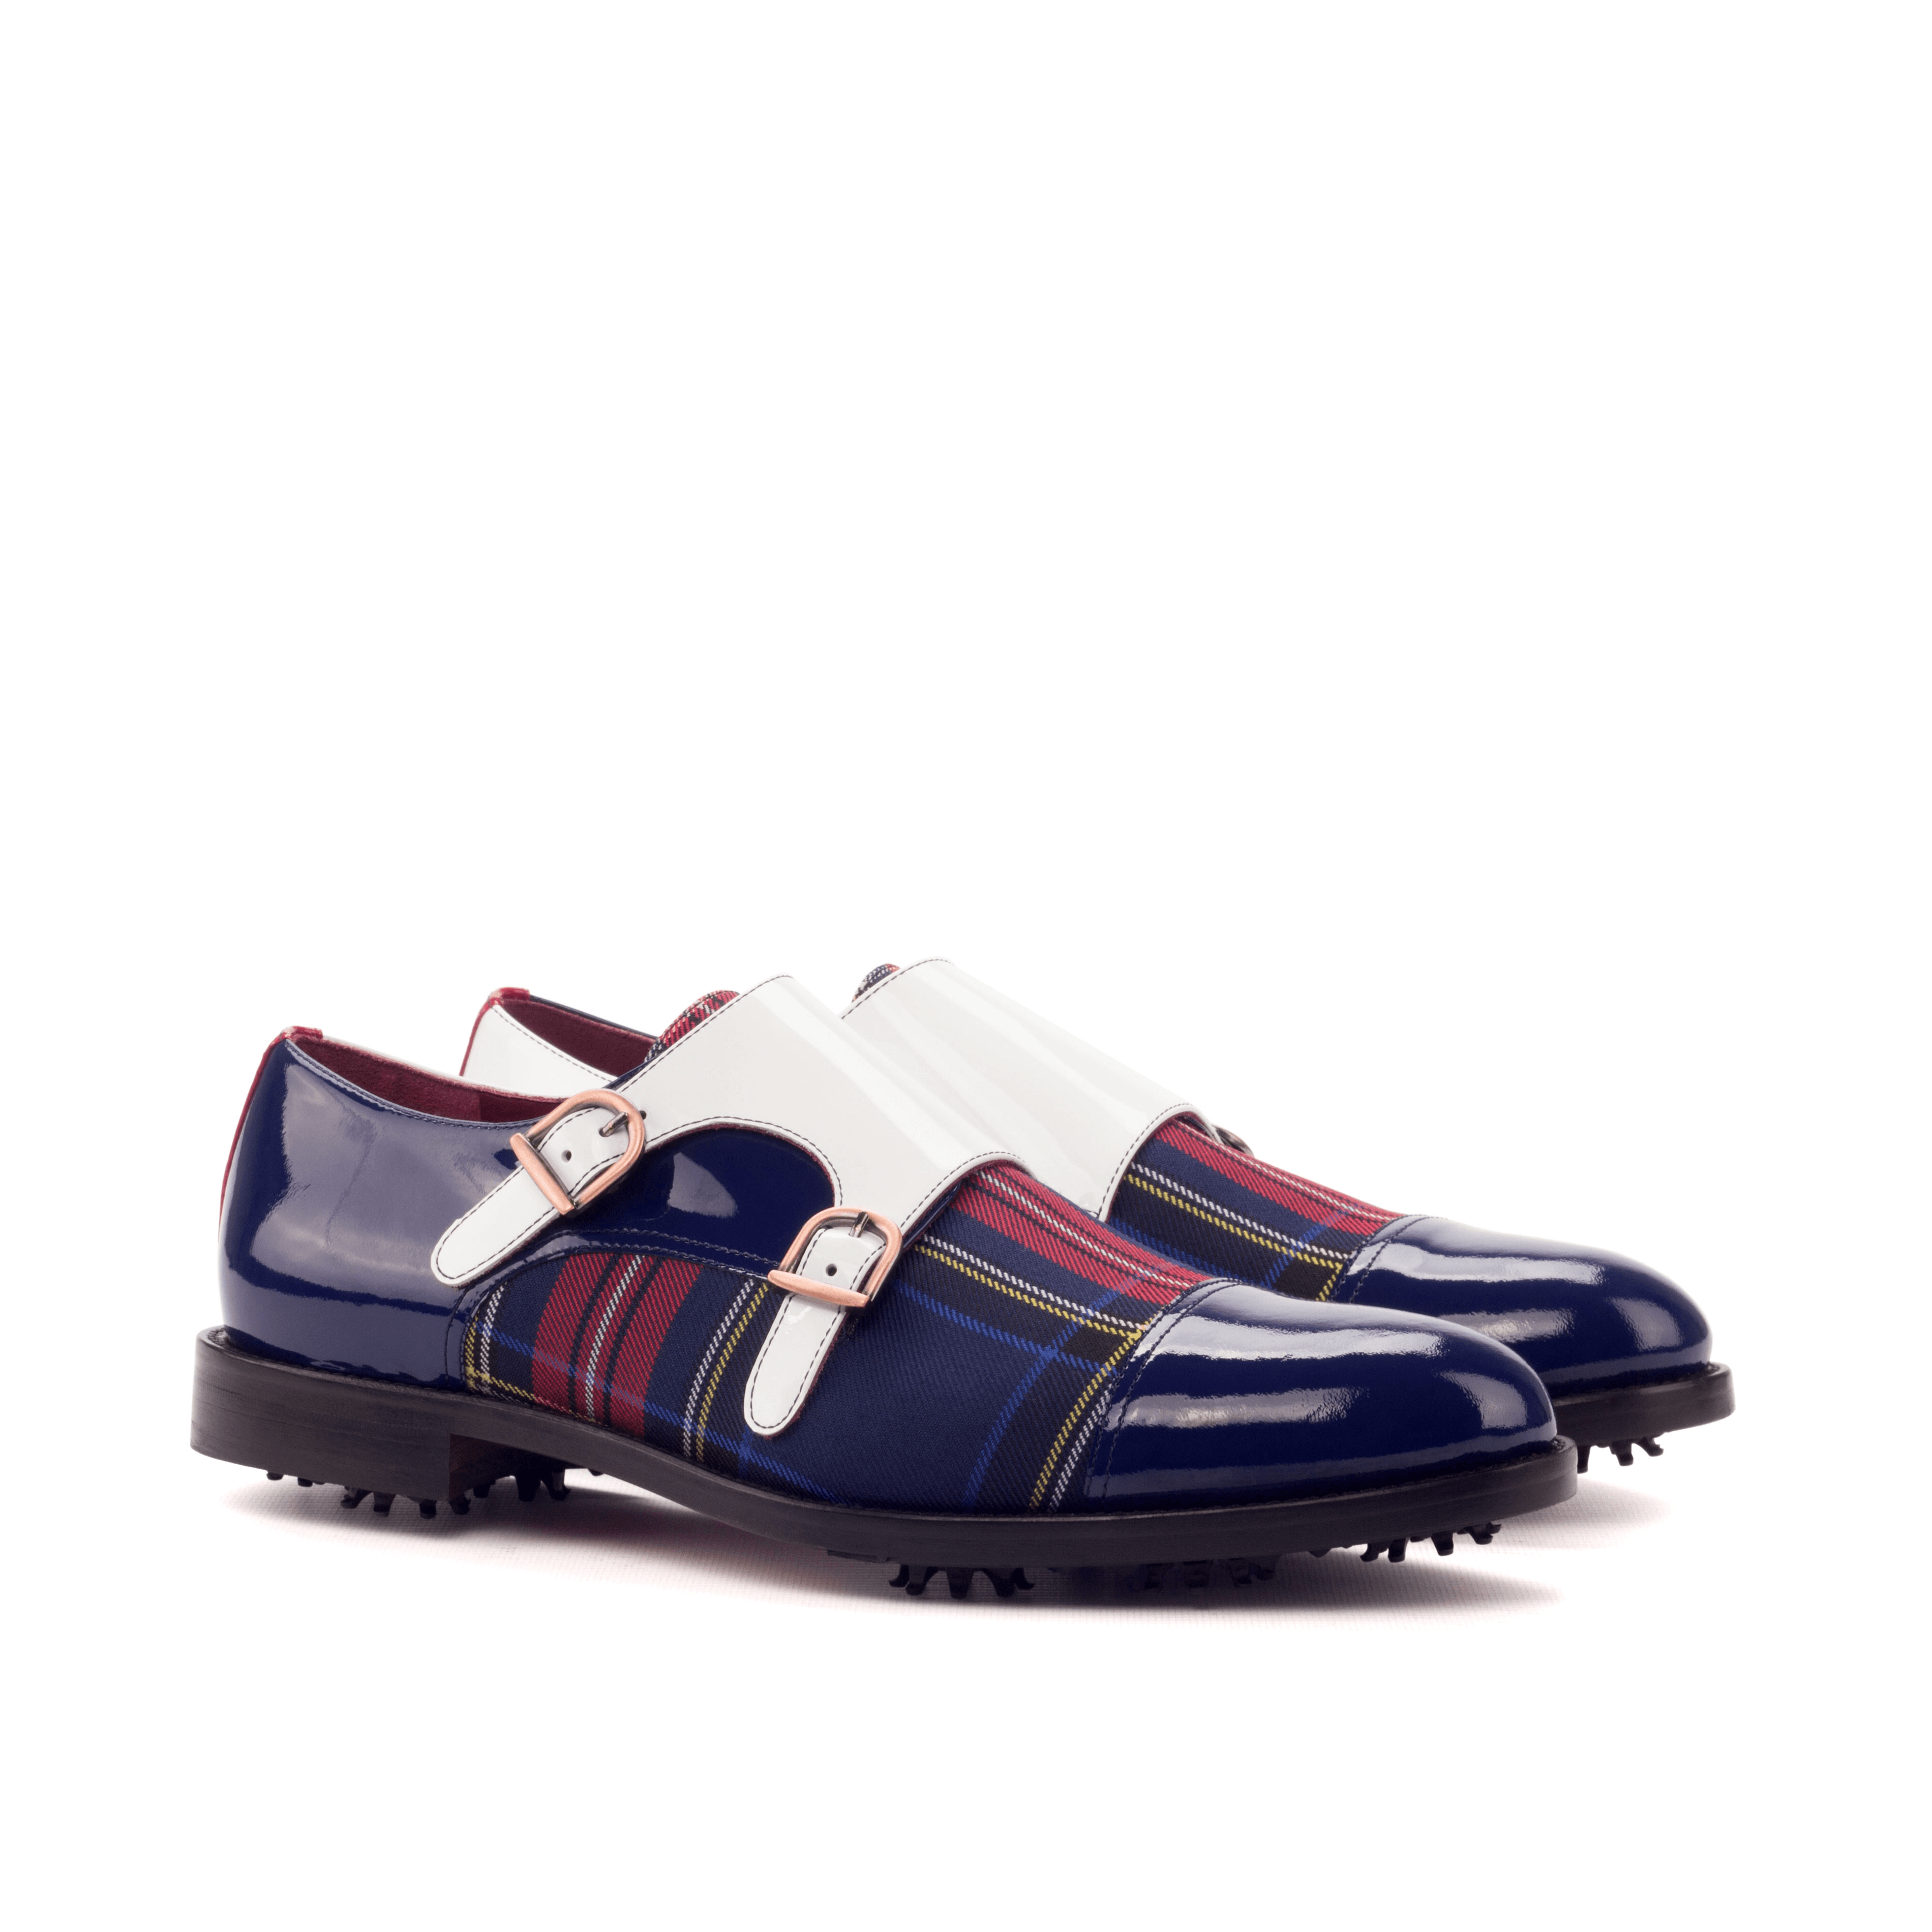 Nationals Golf Shoes